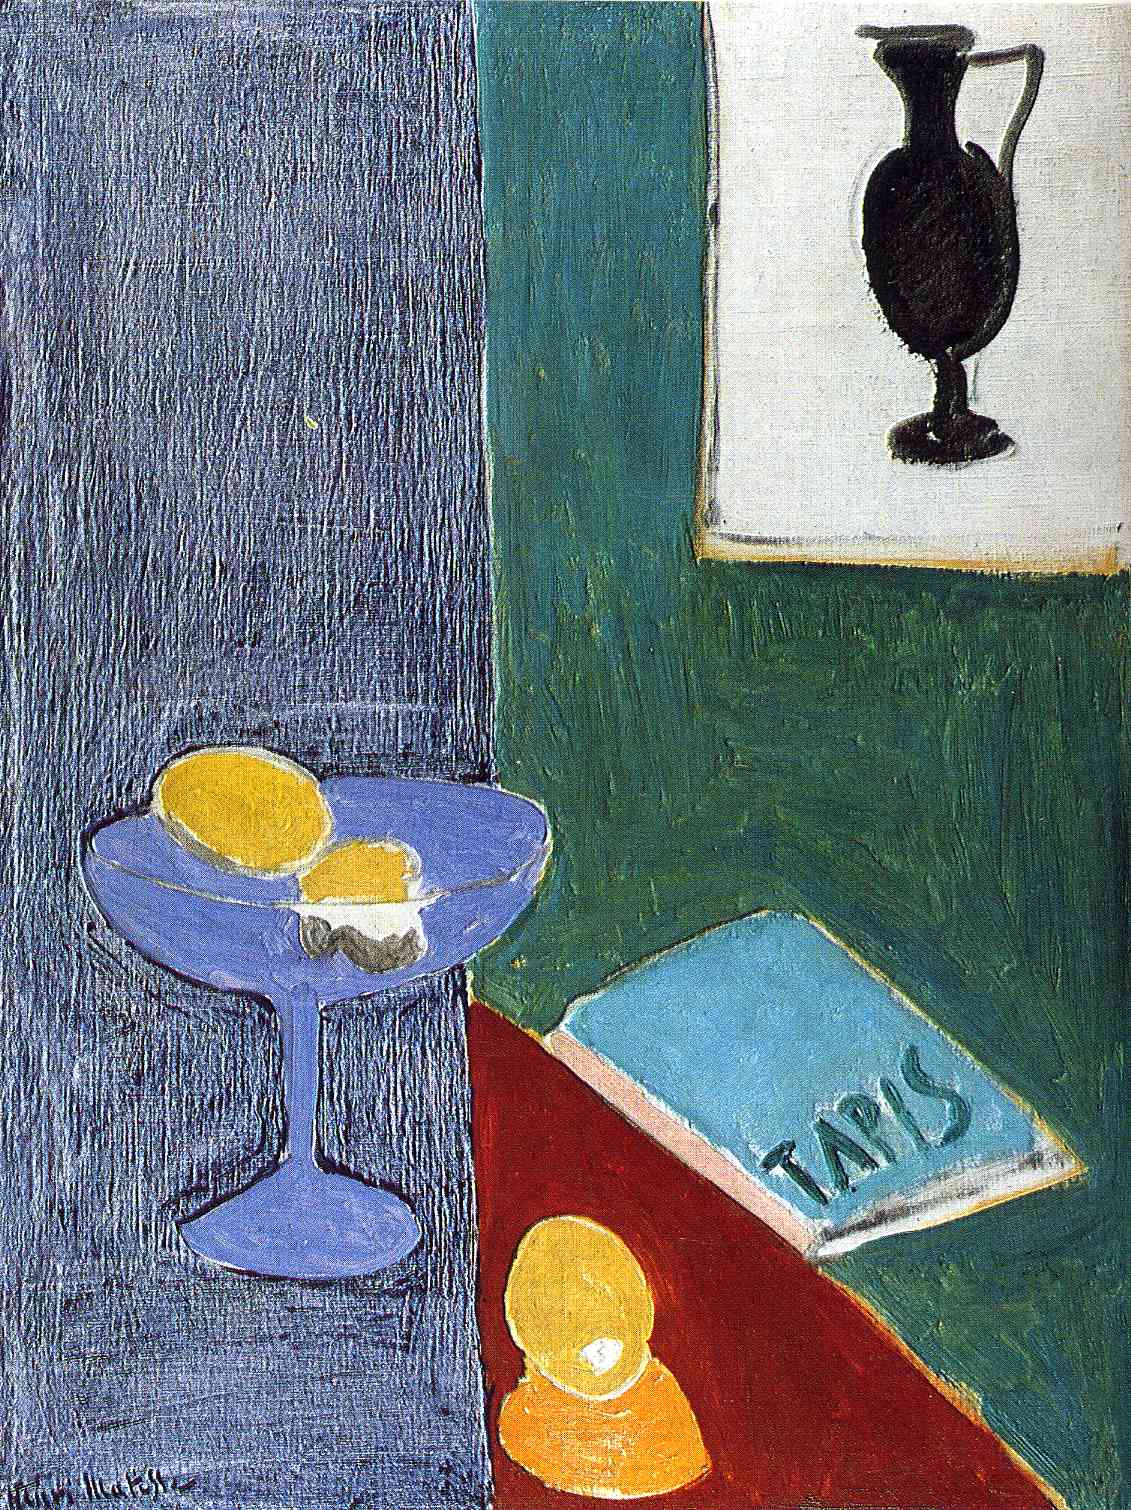 Henri Matisse - Still LIfe with Lemons Which Correspond in Form to a Drawing of a Black Vase on the Wall 1915